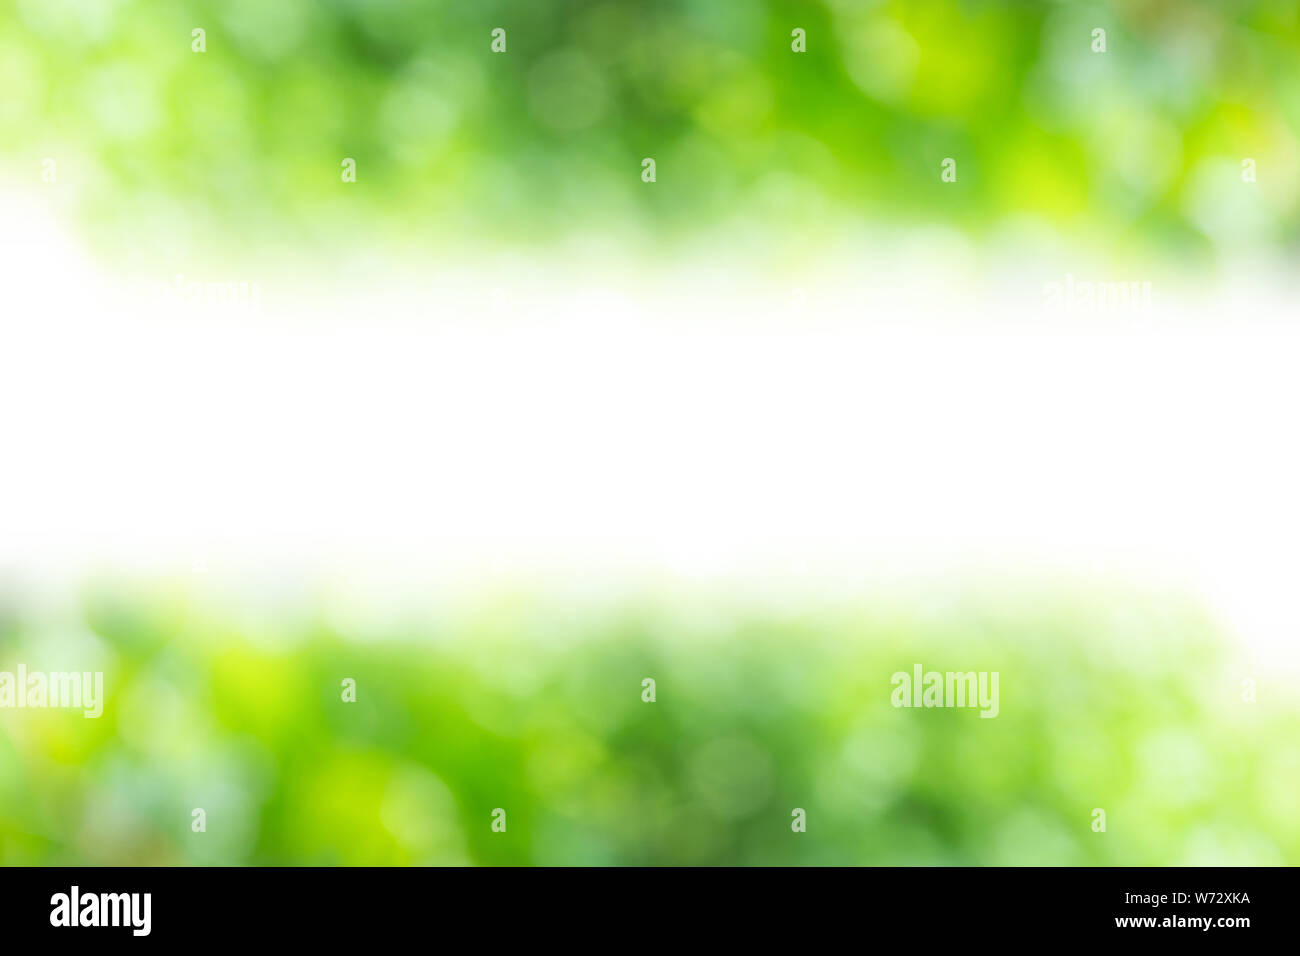 Blurred background : Green abstract of blur nature sunlight with white middle free space for design Stock Photo